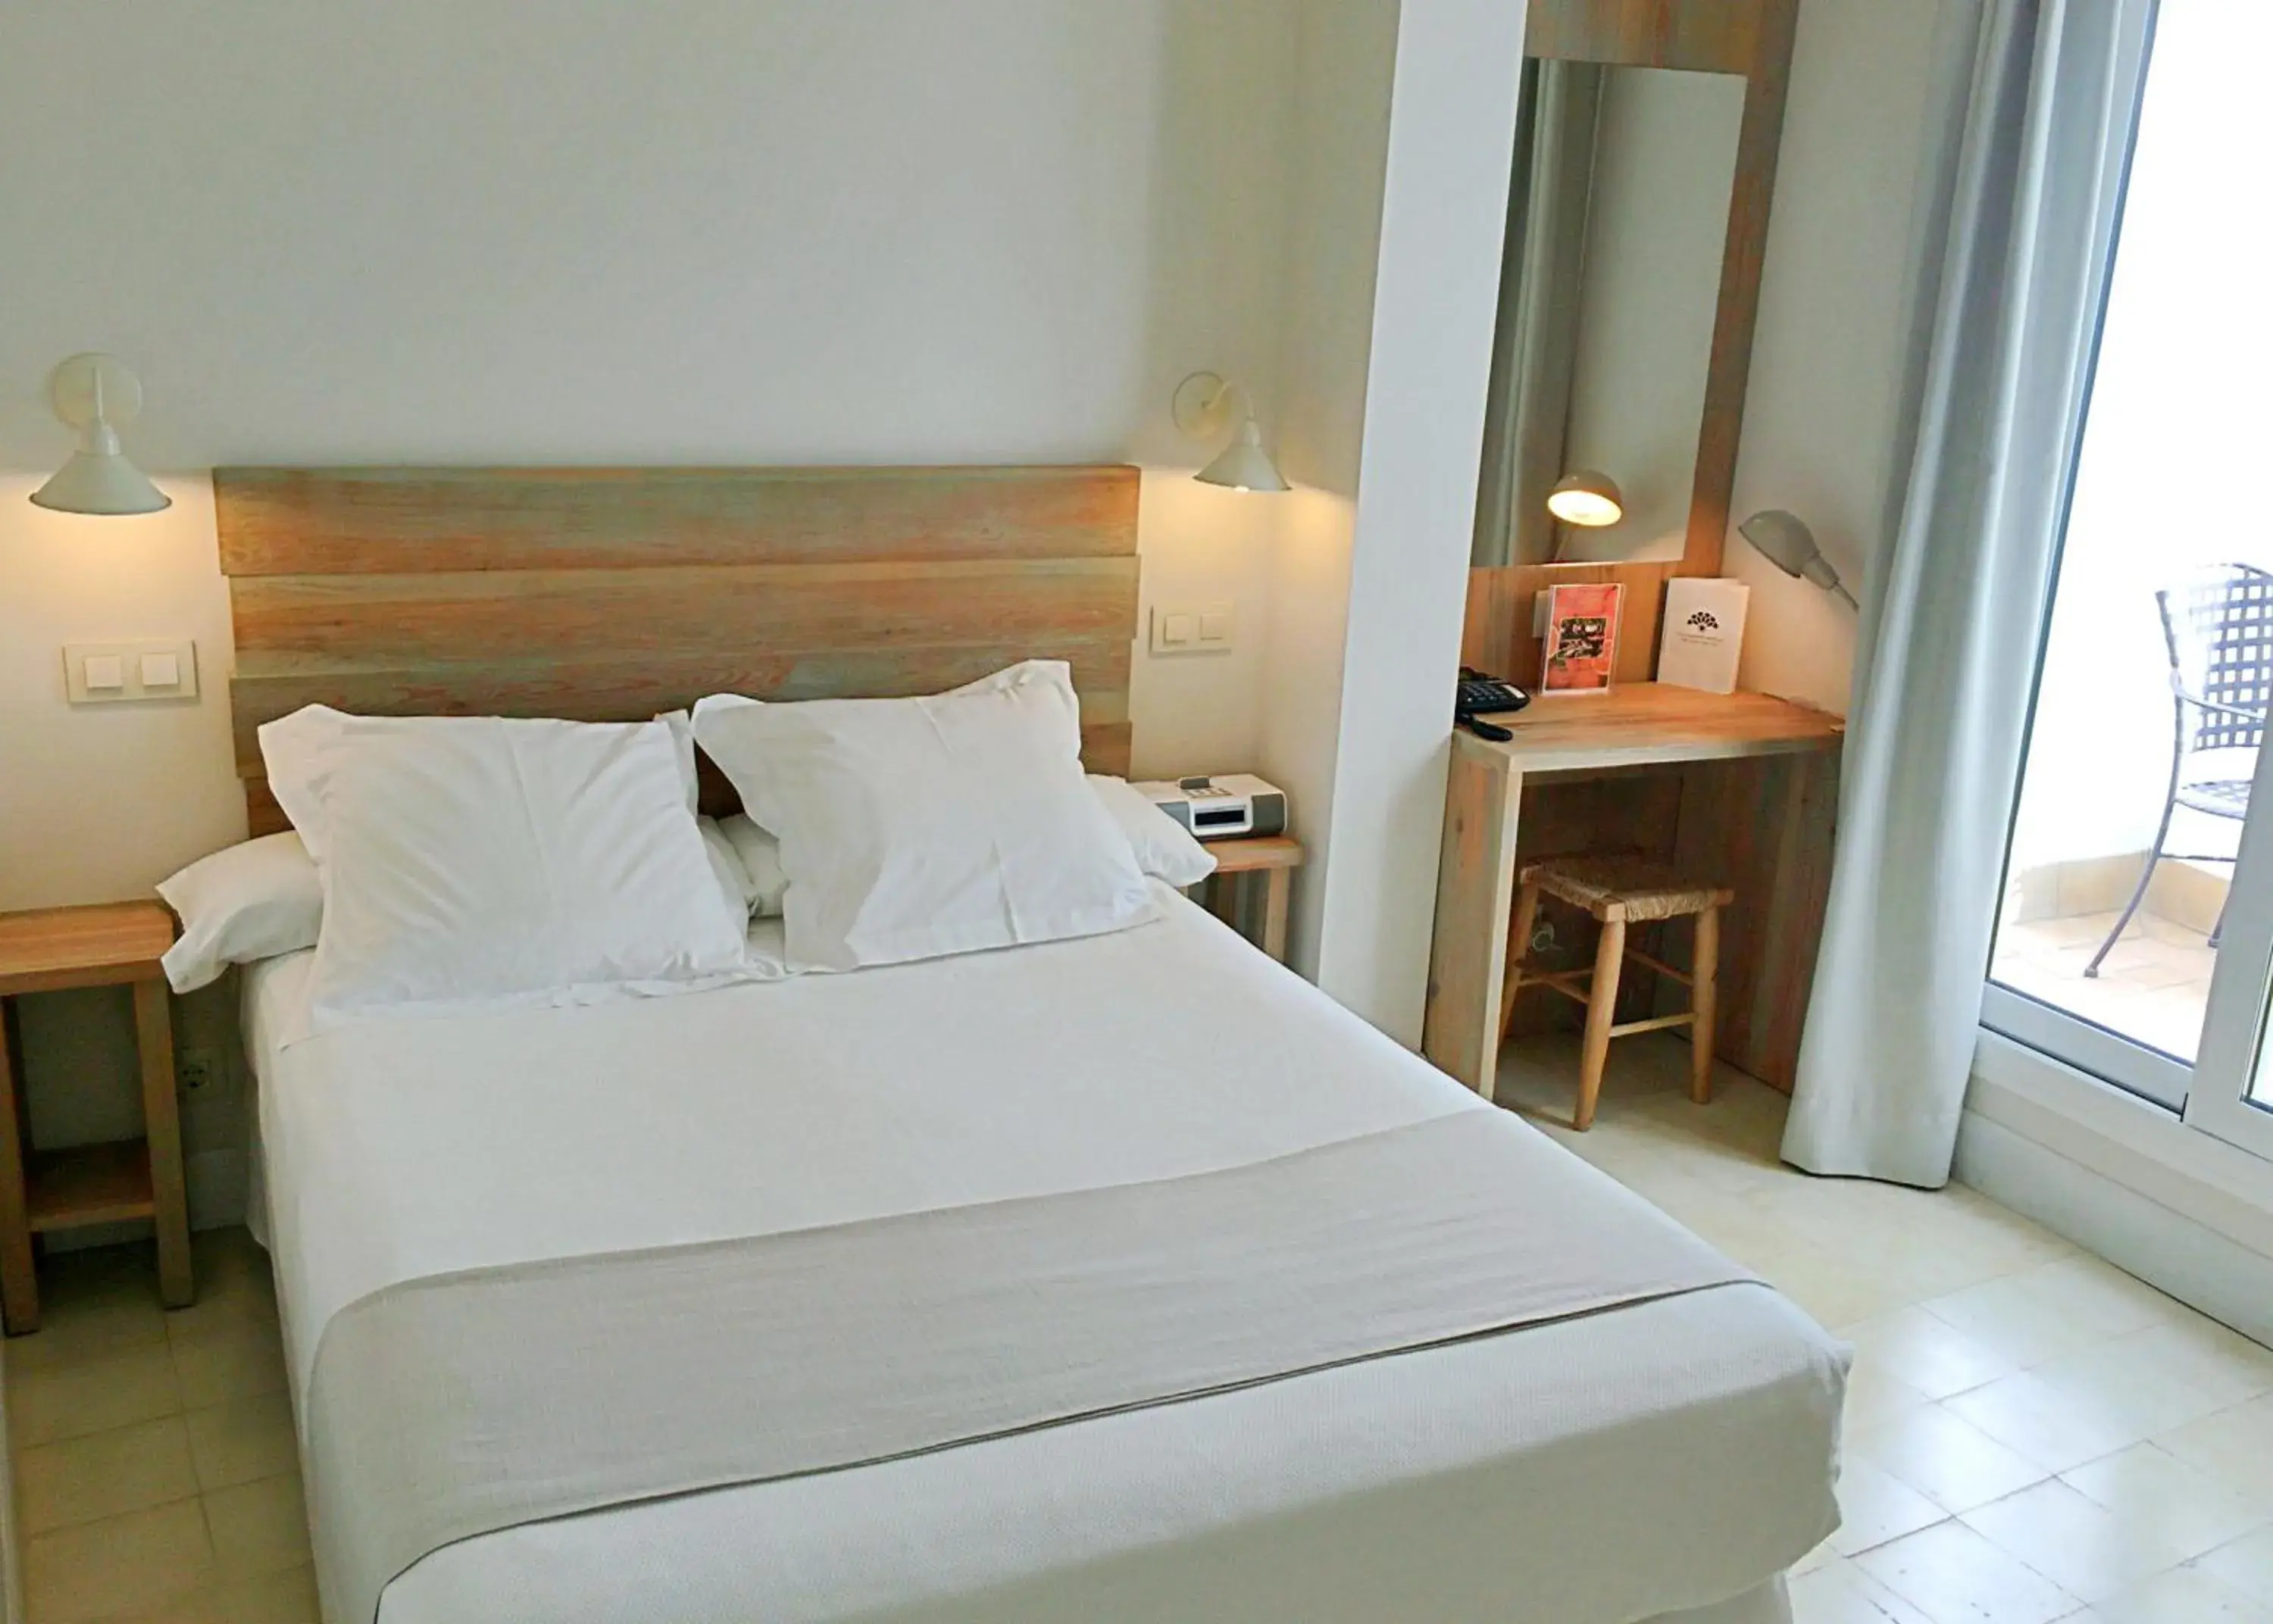 Bed, Room Photo in Hotel Boutique Elvira Plaza